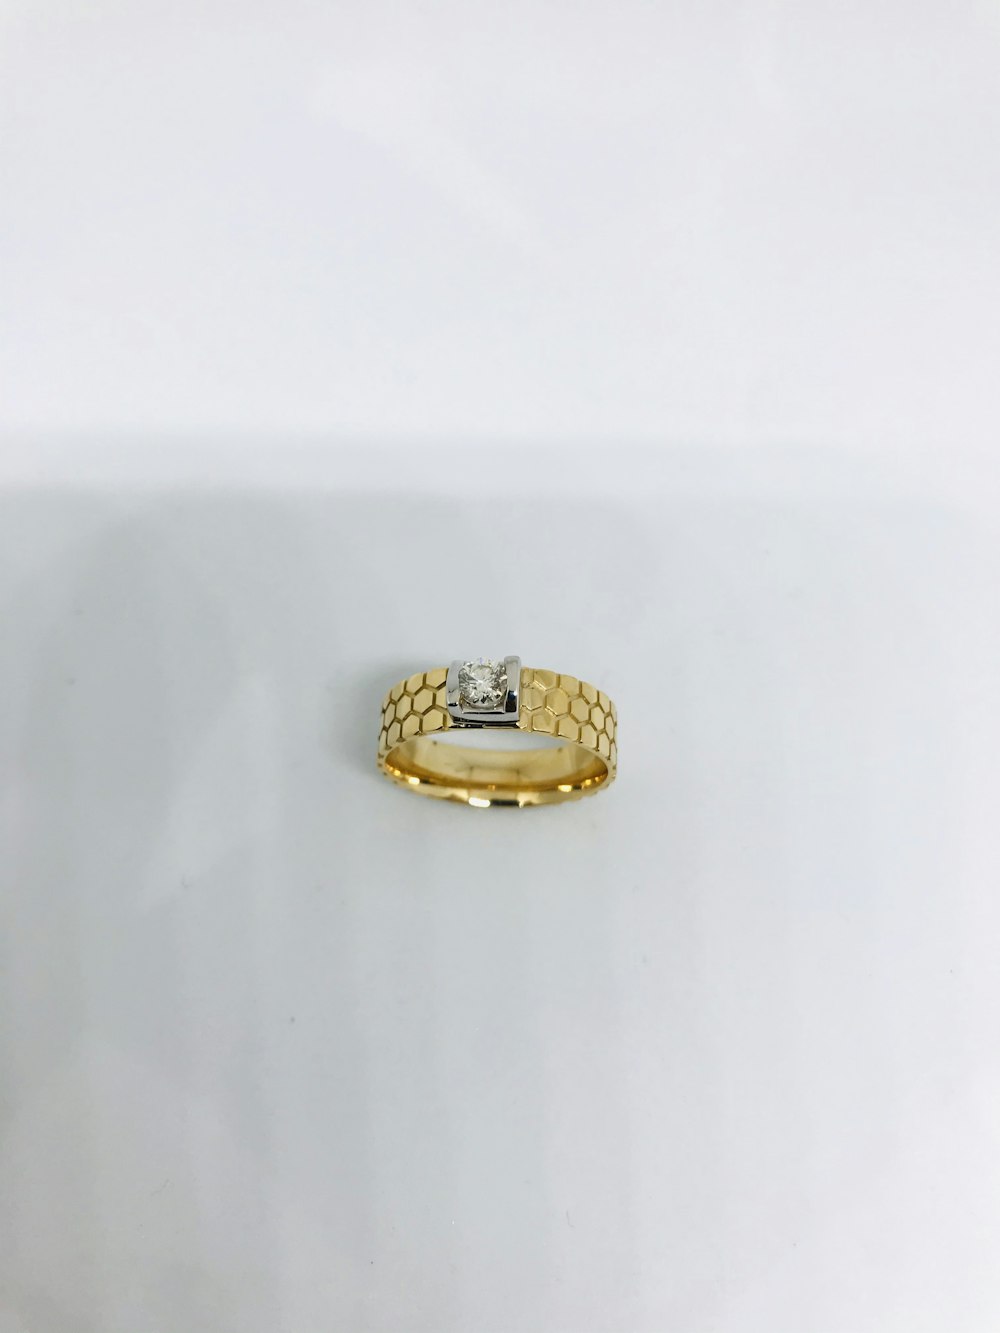 gold ring on white table